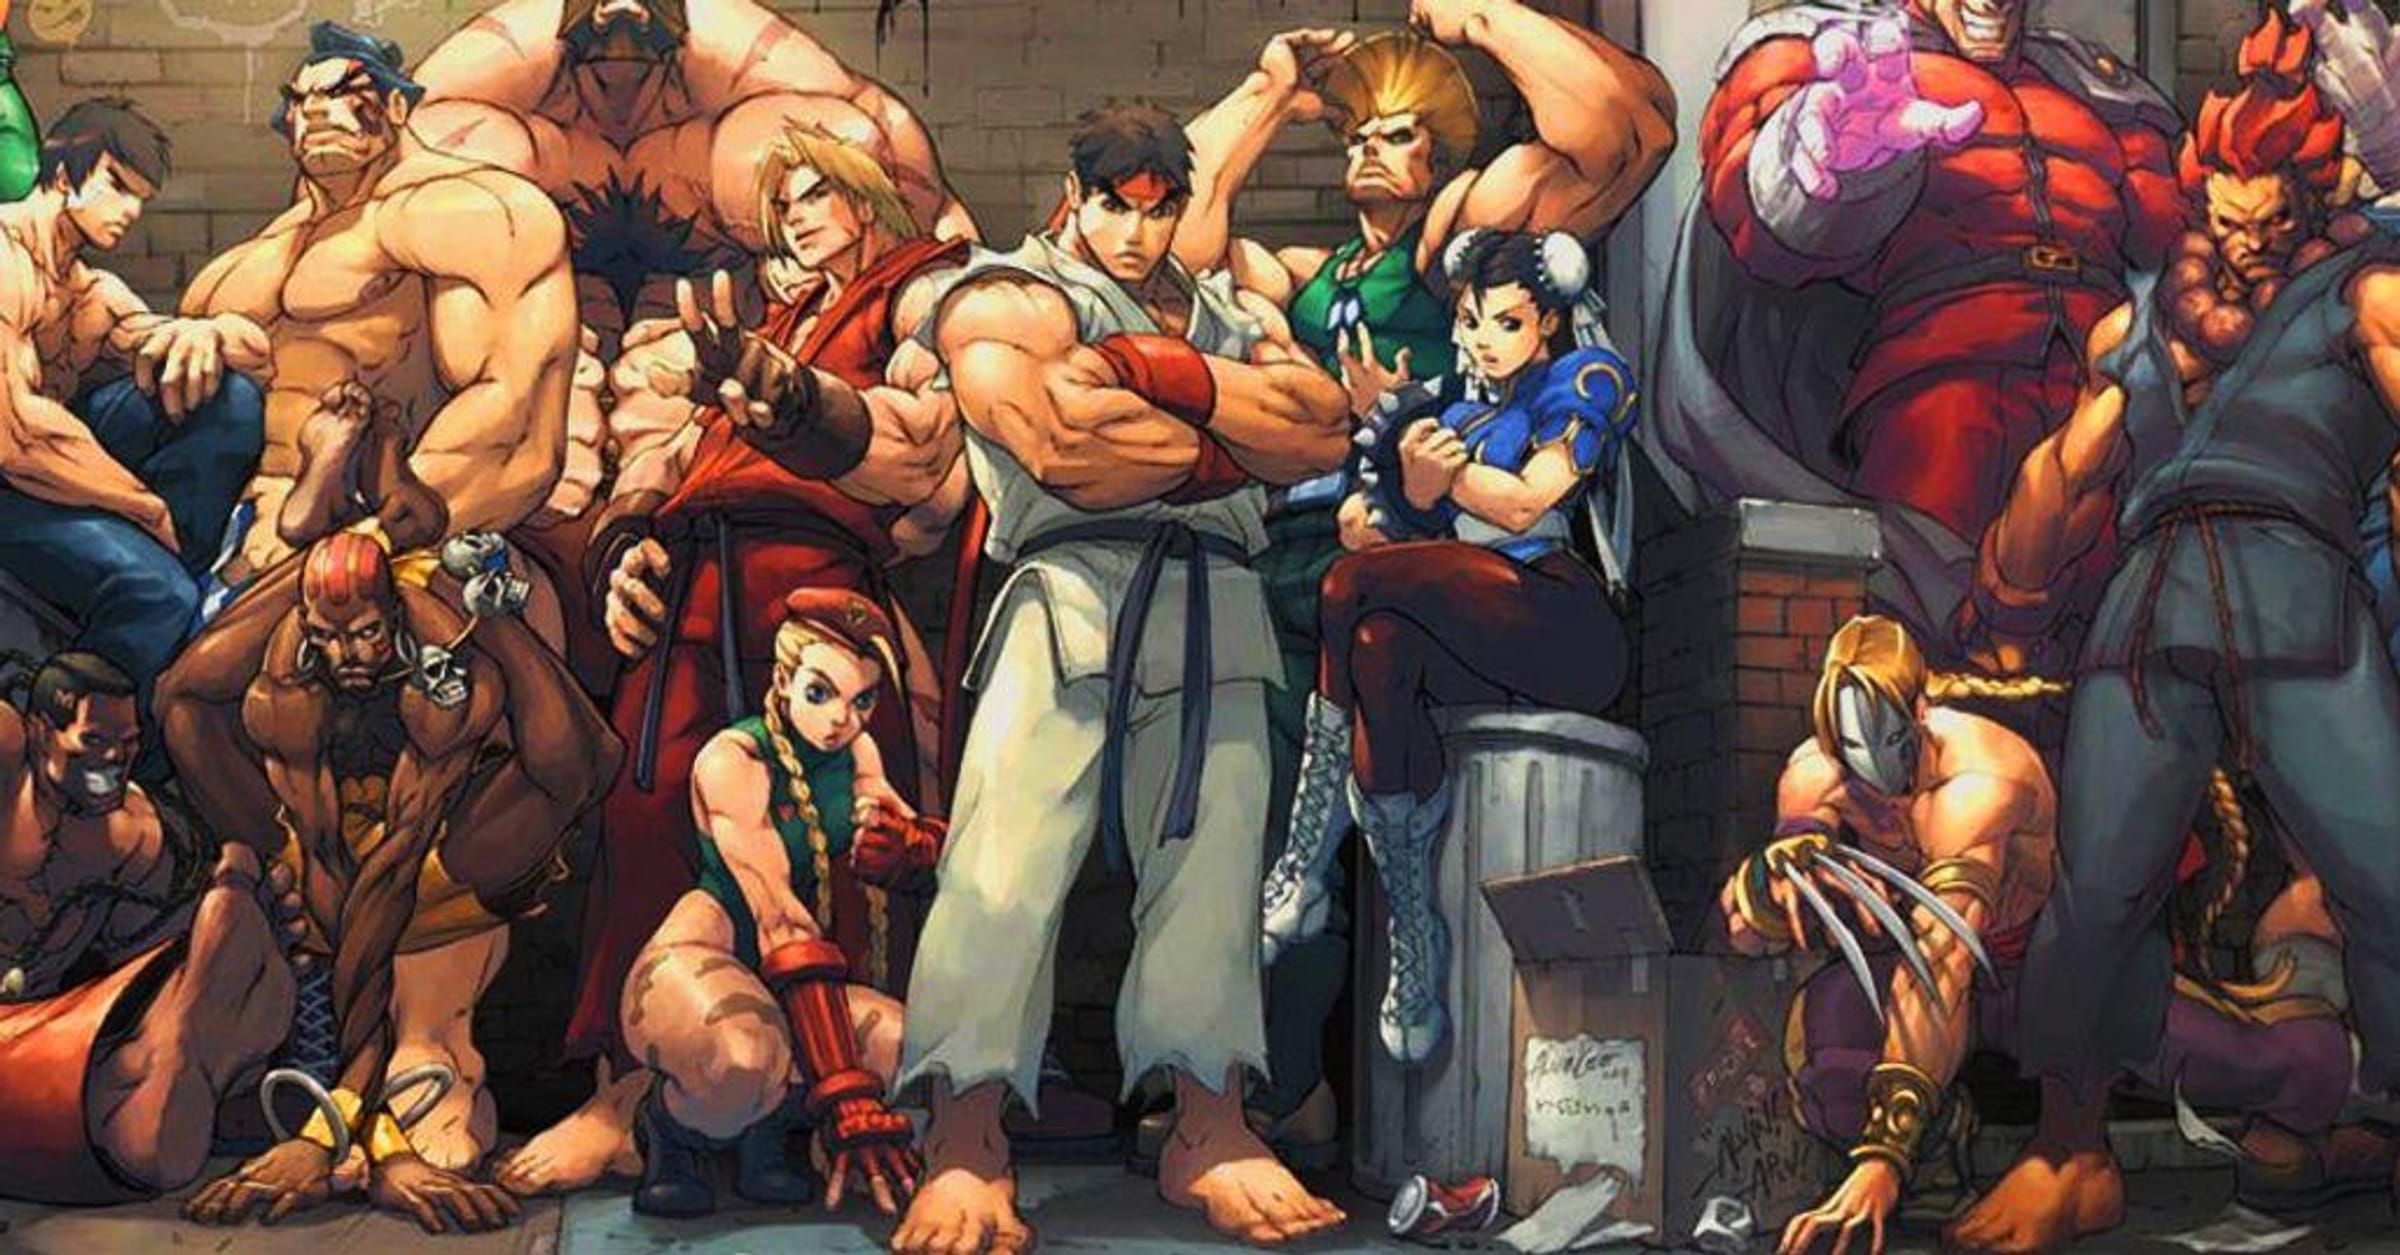 The Complete List of Street Fighter Characters by